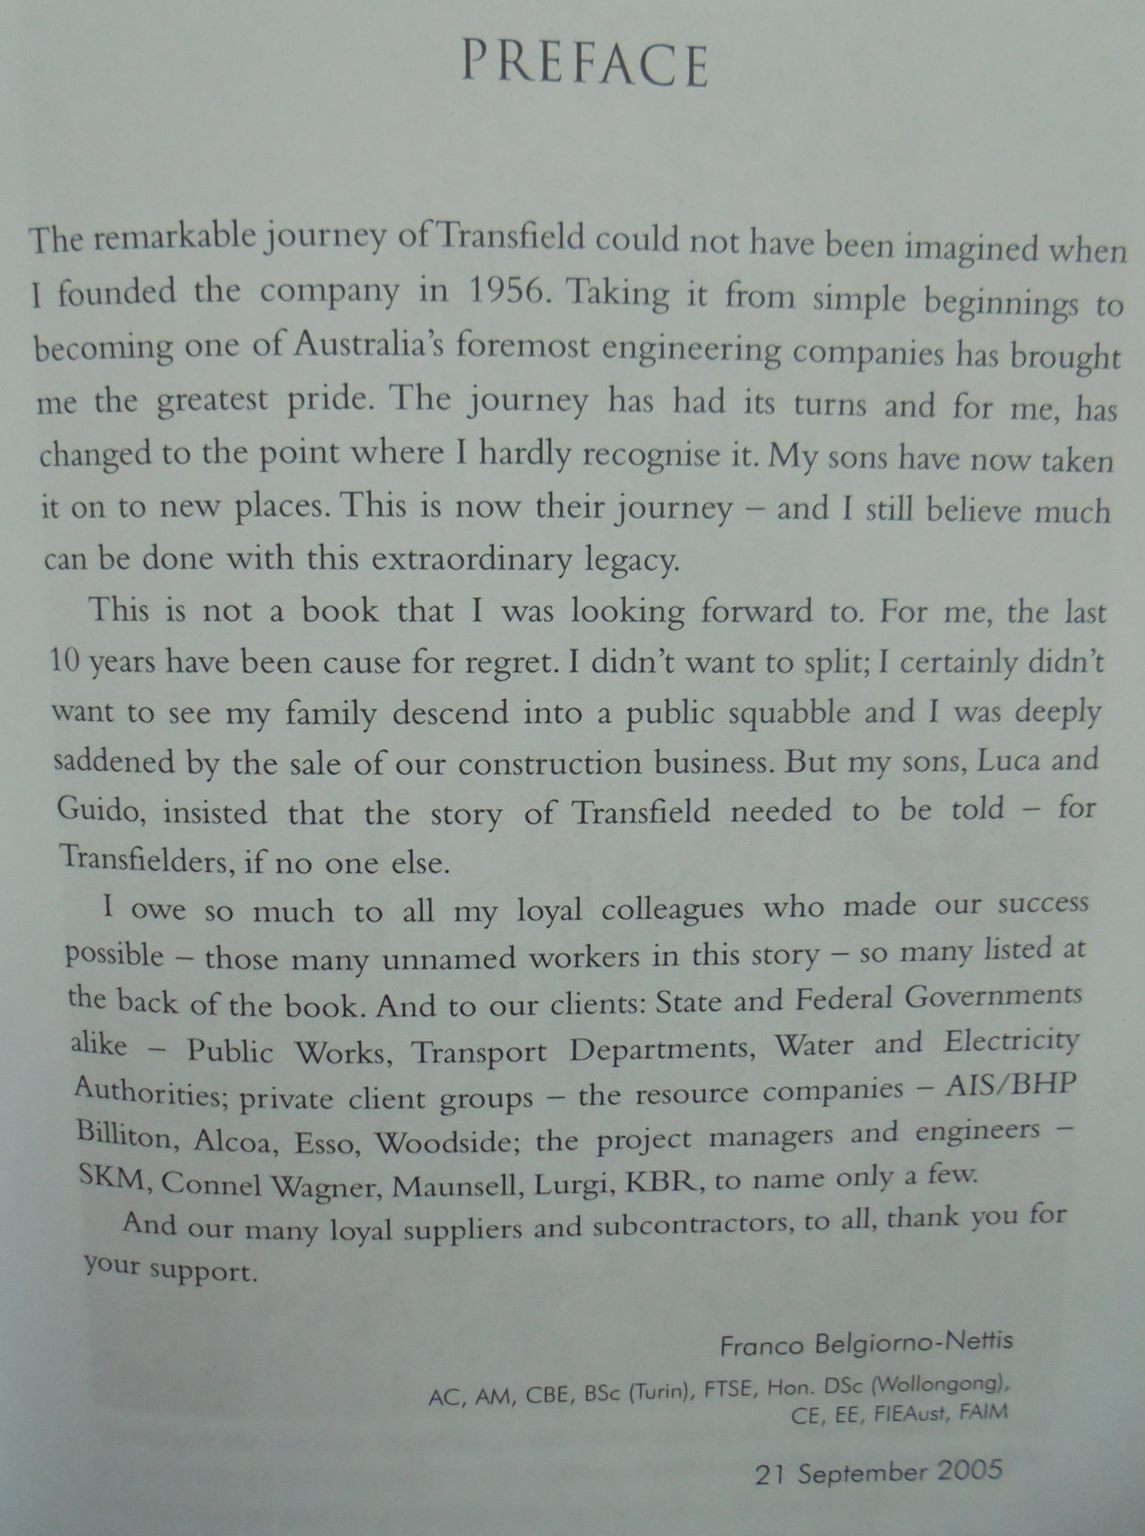 Transfield The First Fifty Years By Gianfranco Cresciani